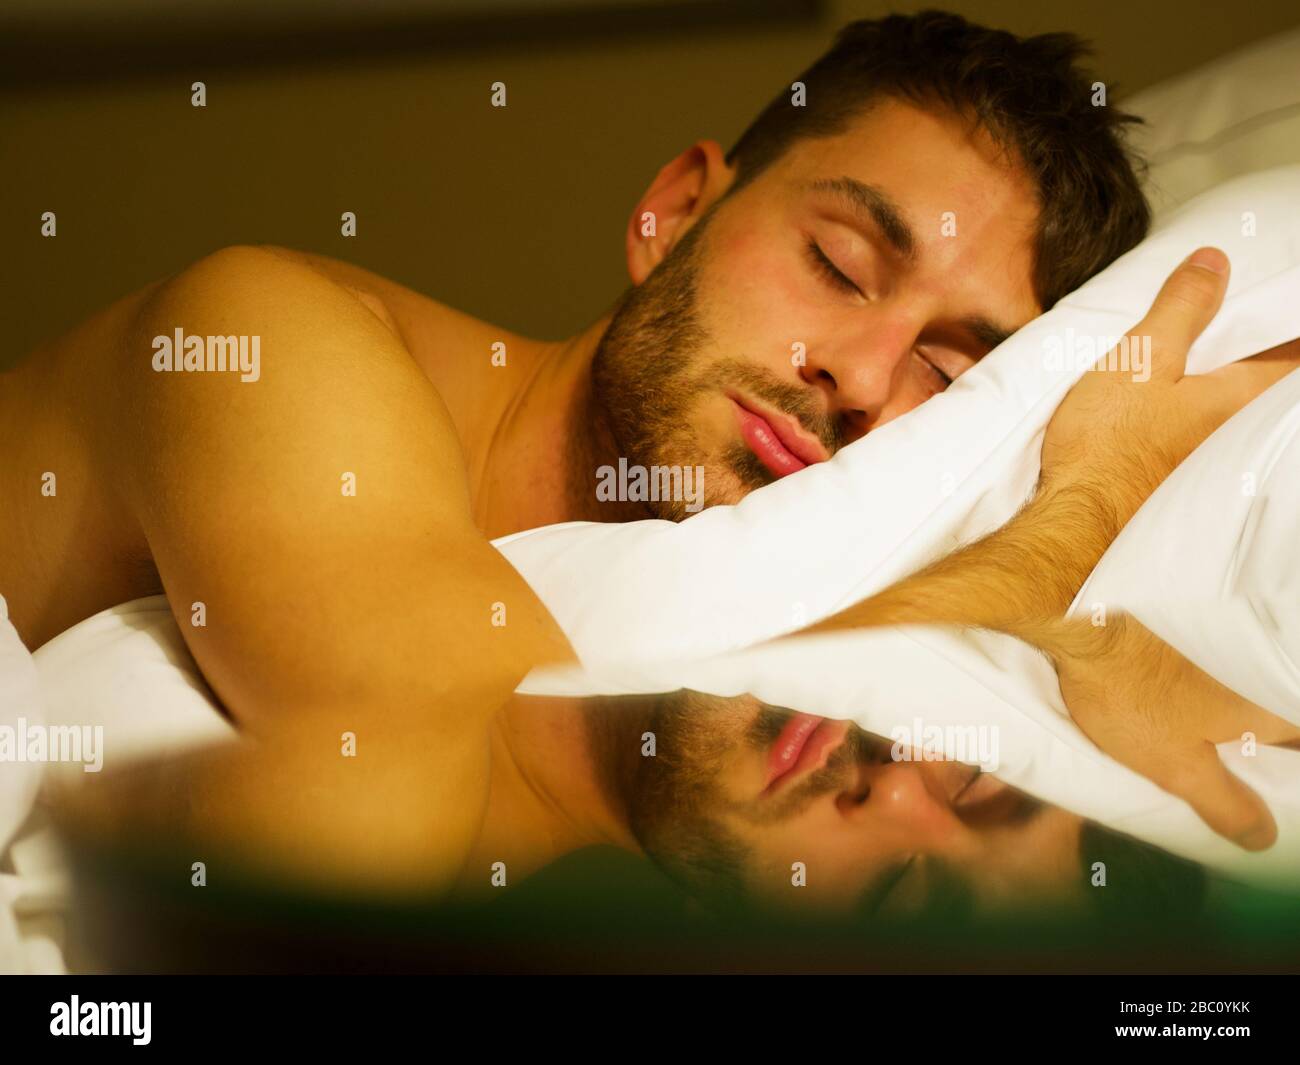 Closeup of a man sleeping in a bed with white sheets and reflection on the nightstand. Stock Photo